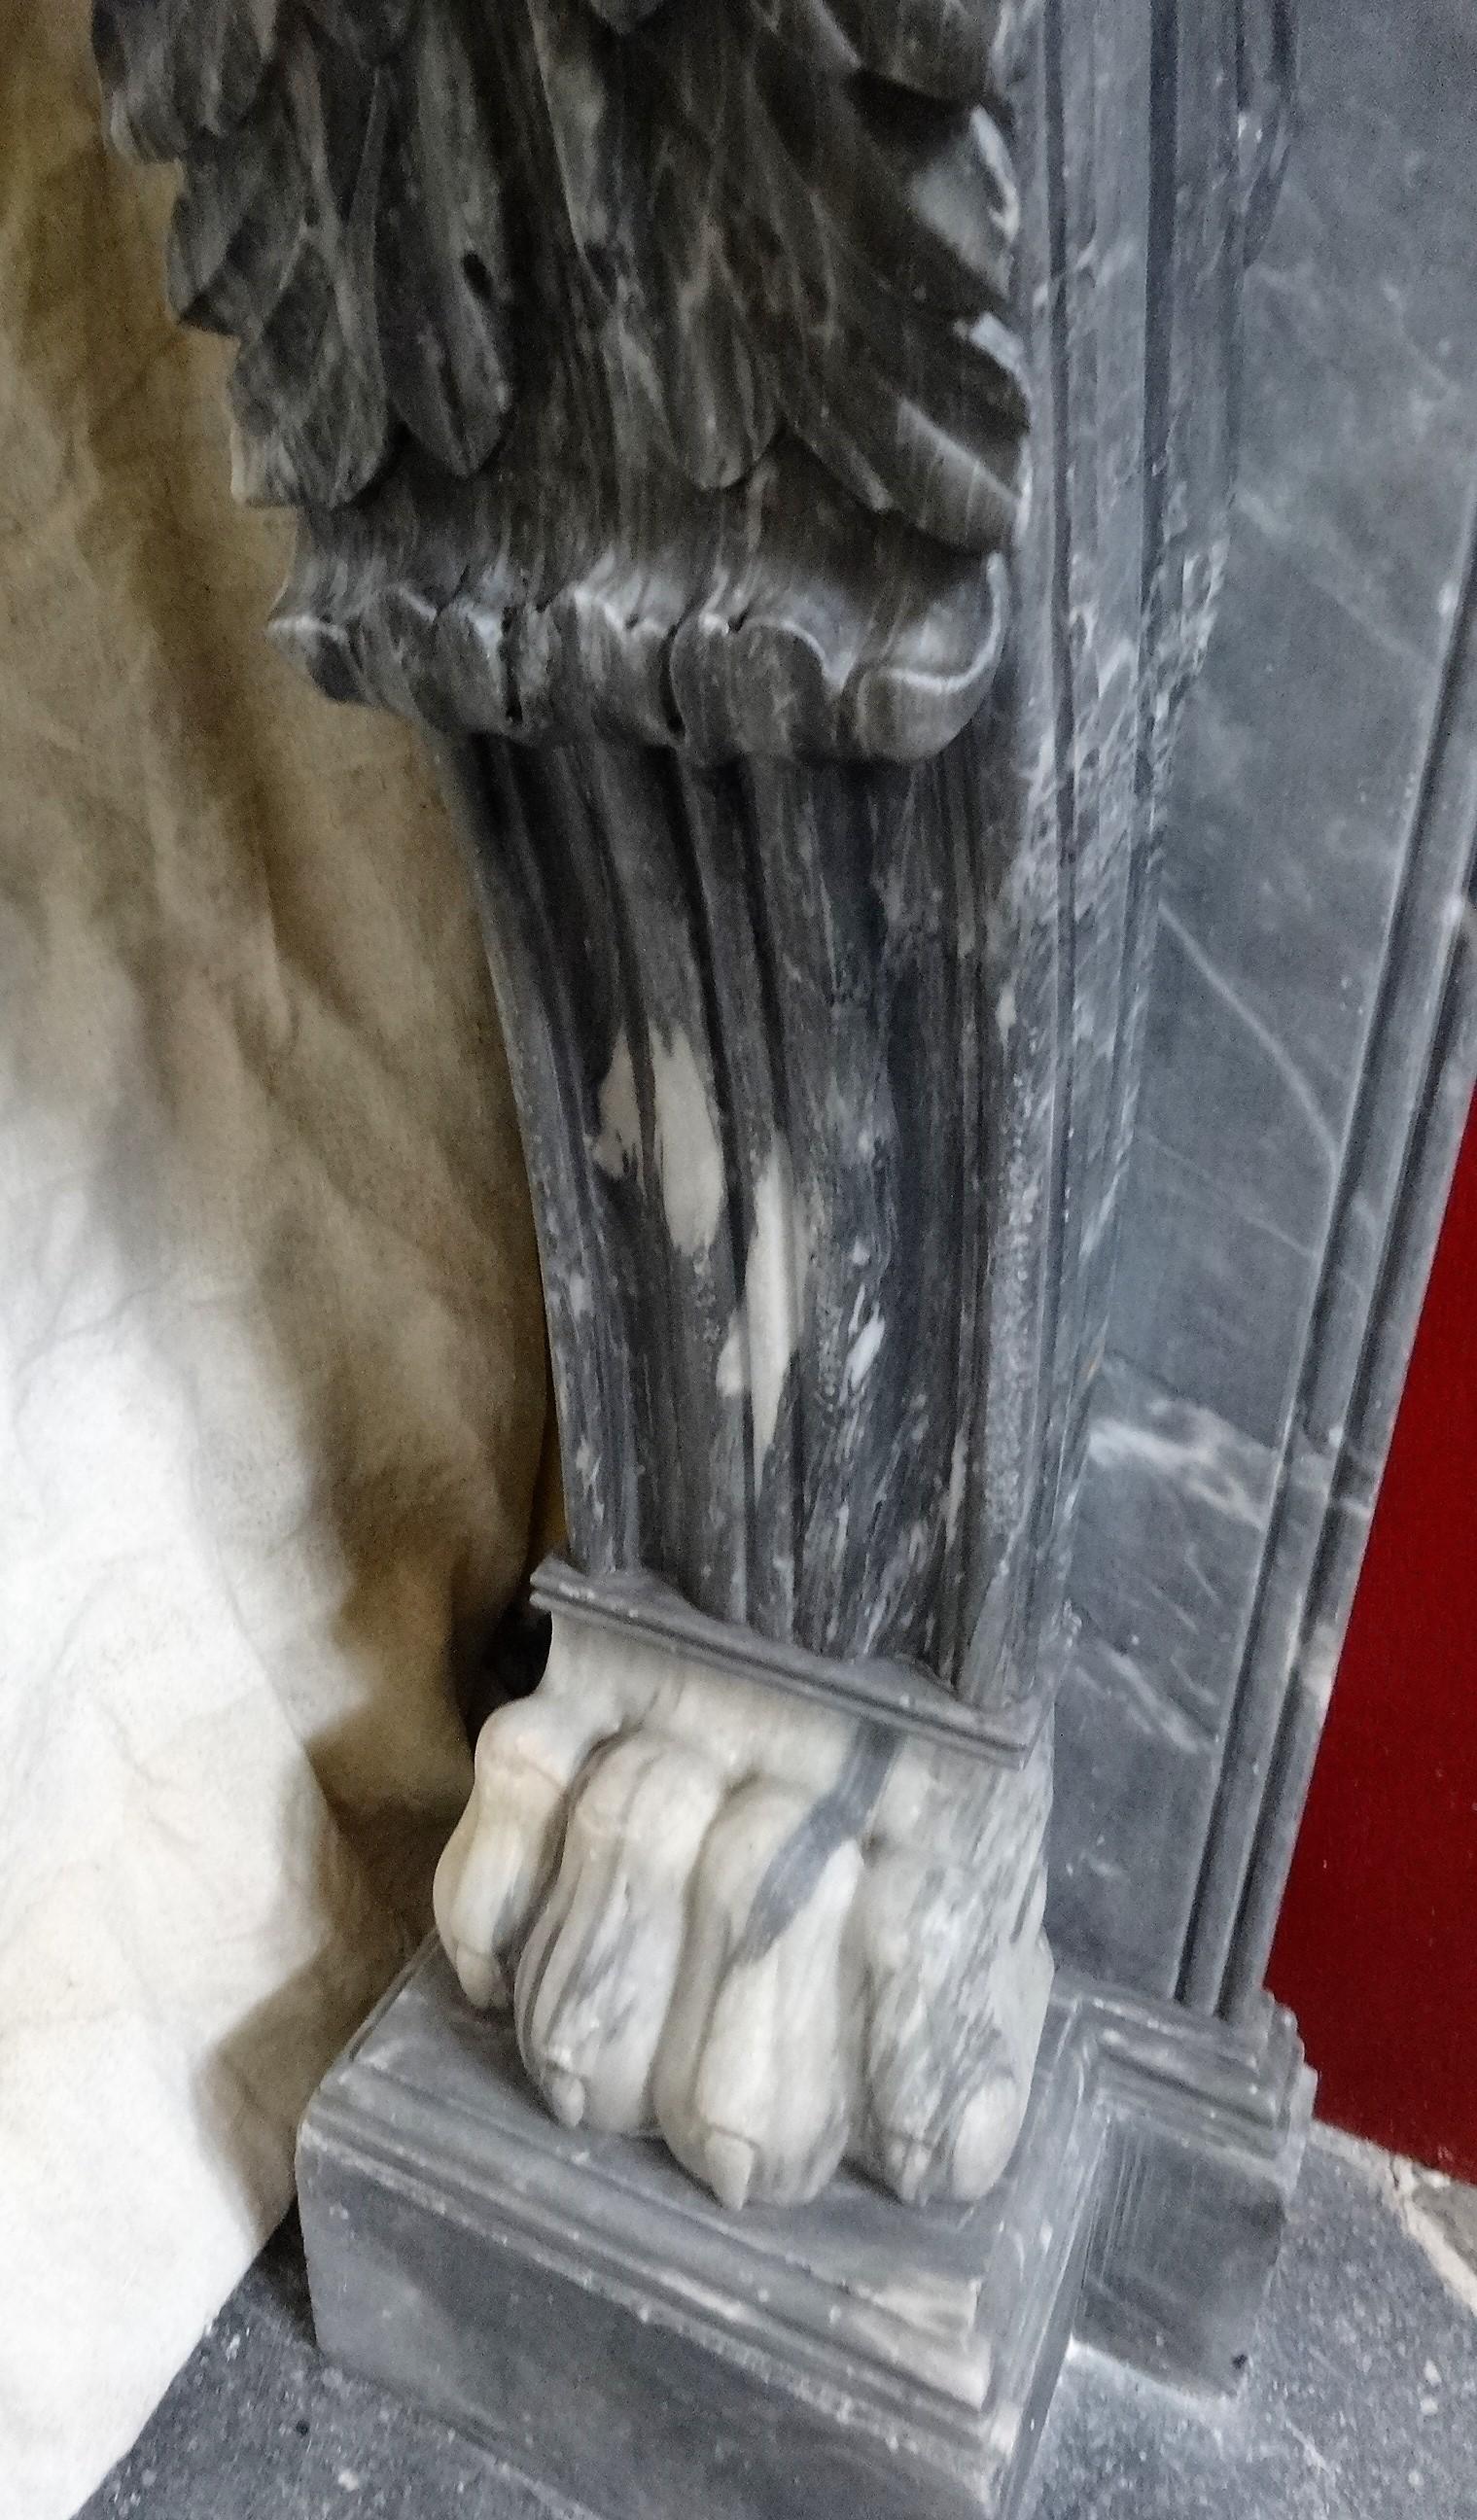 A very, very nice lion's paws antique fireplace, this time not in Carrara or a black marble, but made of the highly-valued Bleu Turquin.
Made in the 19th century. The jambs are adorned with nicely carved, large leaves.  This fireplace, imposing and